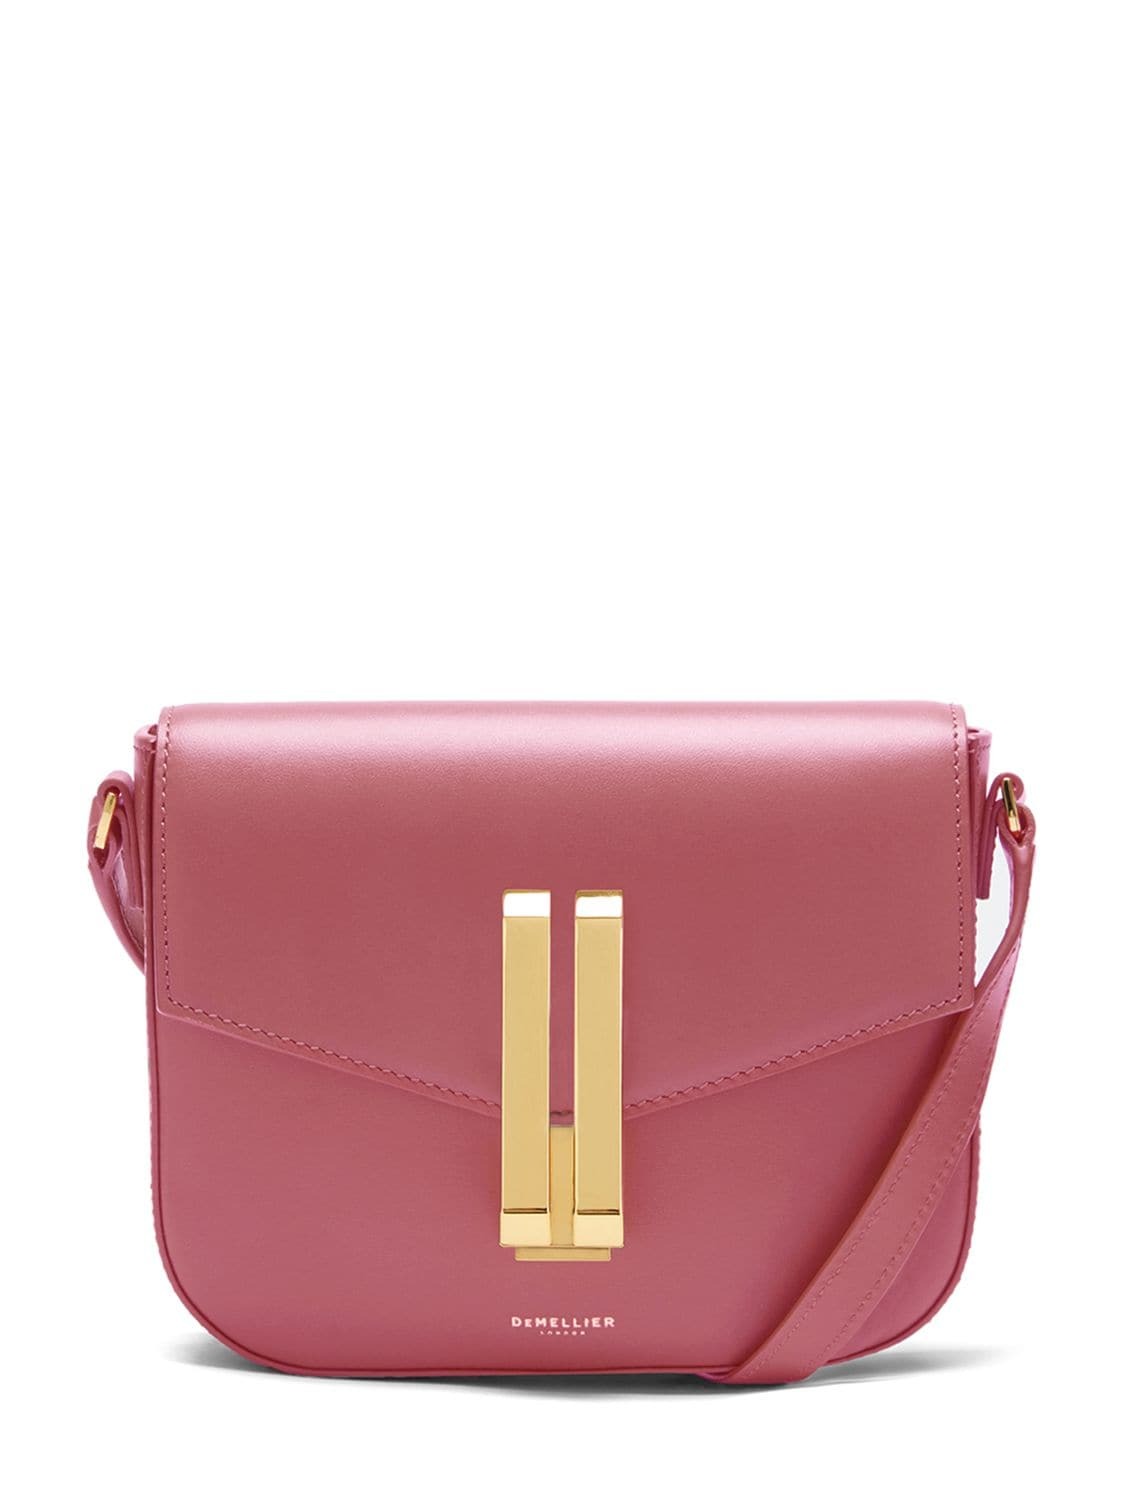 DEMELLIER Small Vancouver Leather Crossbody Bag in rose